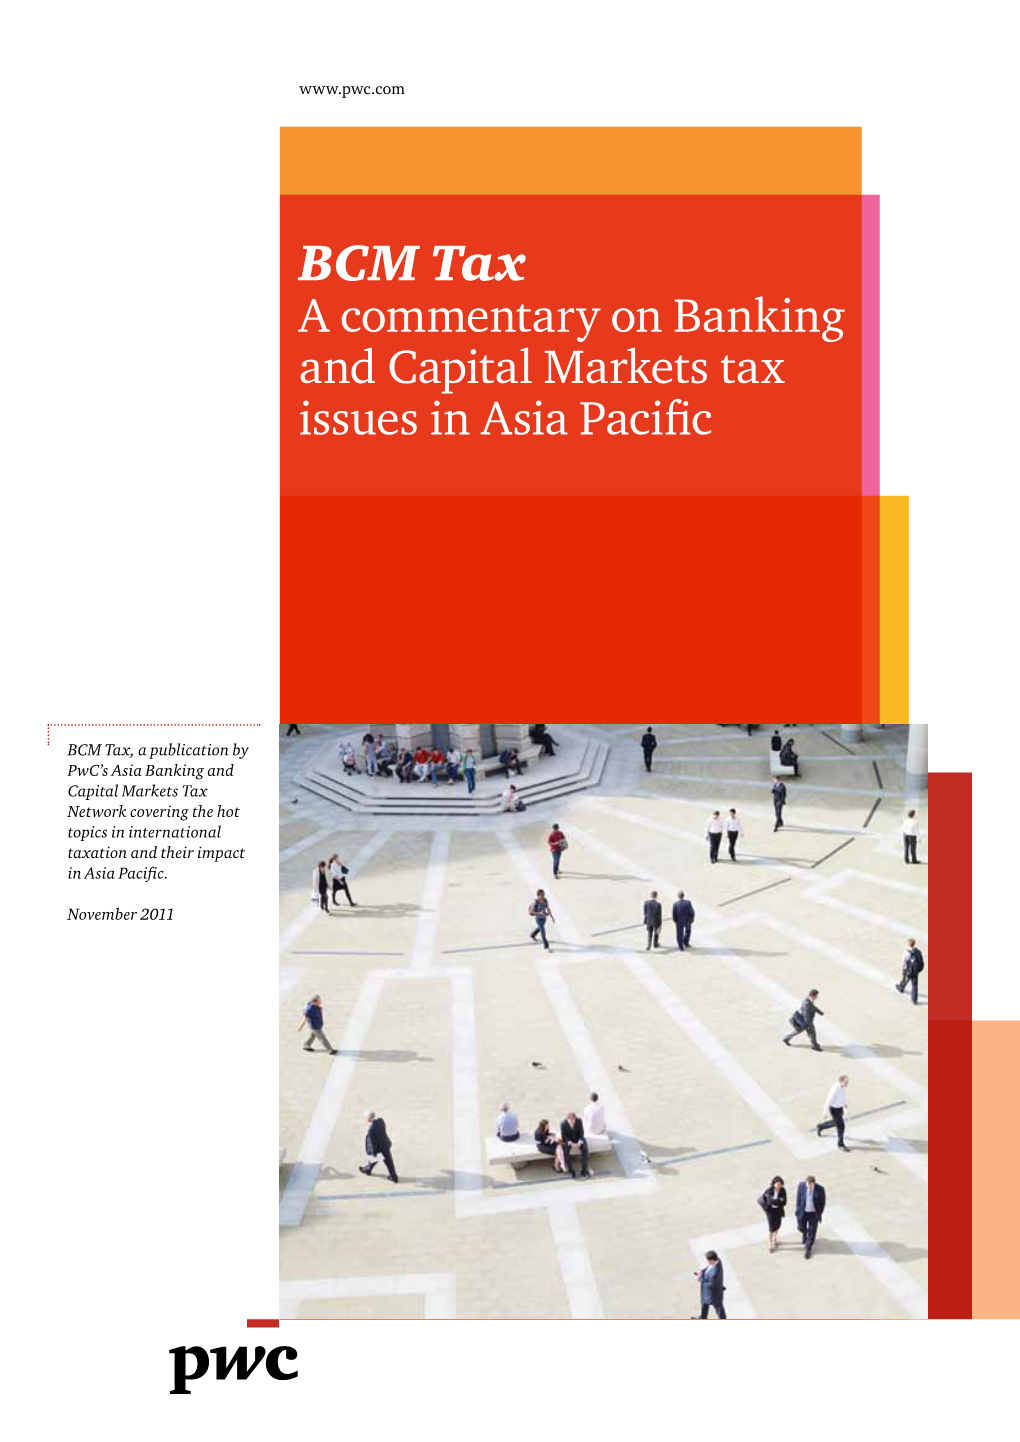 BCM Tax a Commentary on Banking and Capital Markets Tax Issues in Asia Pacific